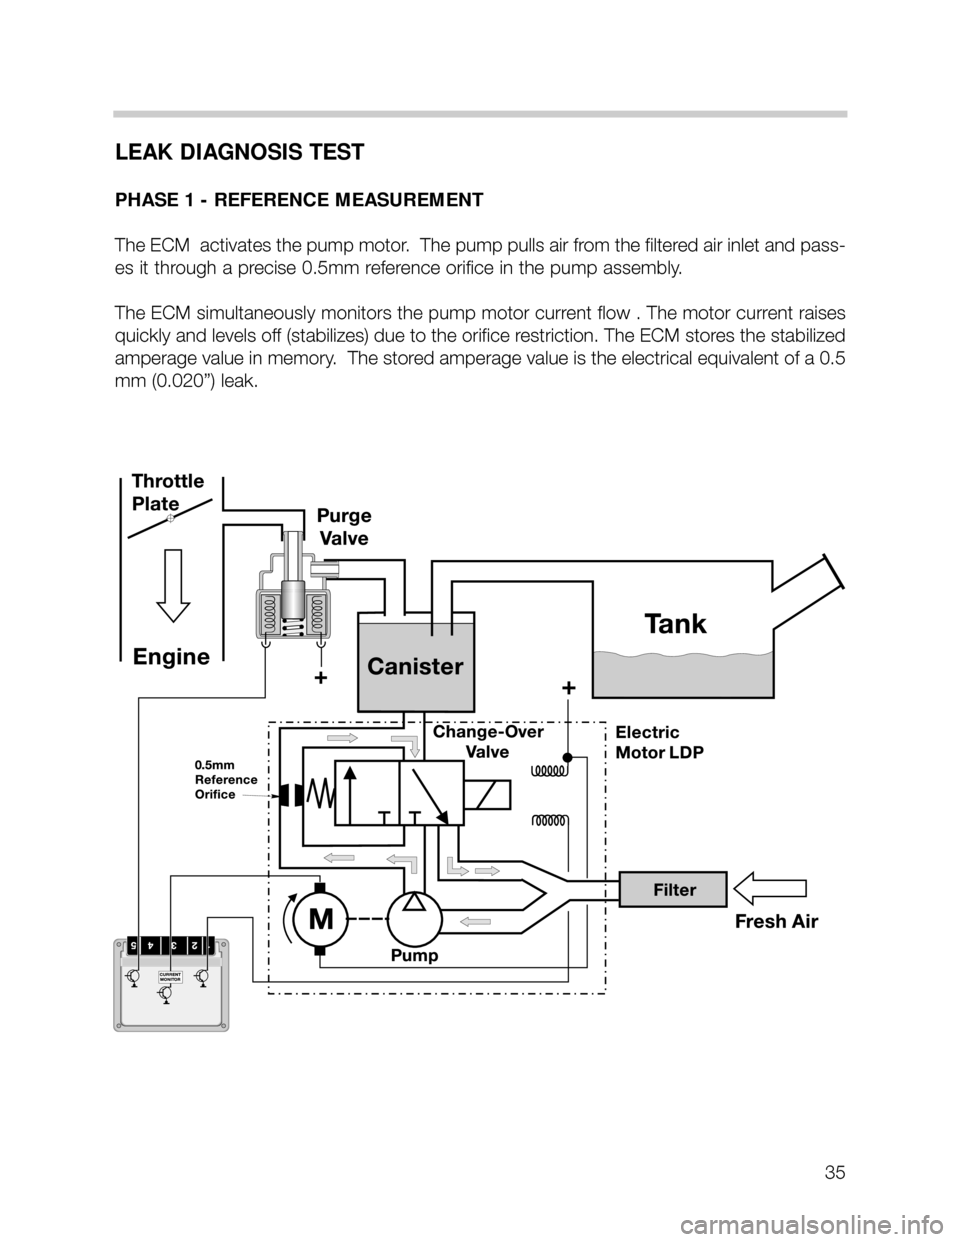 BMW X5 2001 E53 M62TU Engine Owners Guide LEAK DIAGNOSIS TEST
PHASE 1 - REFERENCE MEASUREMENT
The ECM  activates the pump motor.  The pump pulls air from the filtered air inlet and pass-
es it through a precise 0.5mm reference orifice in the 